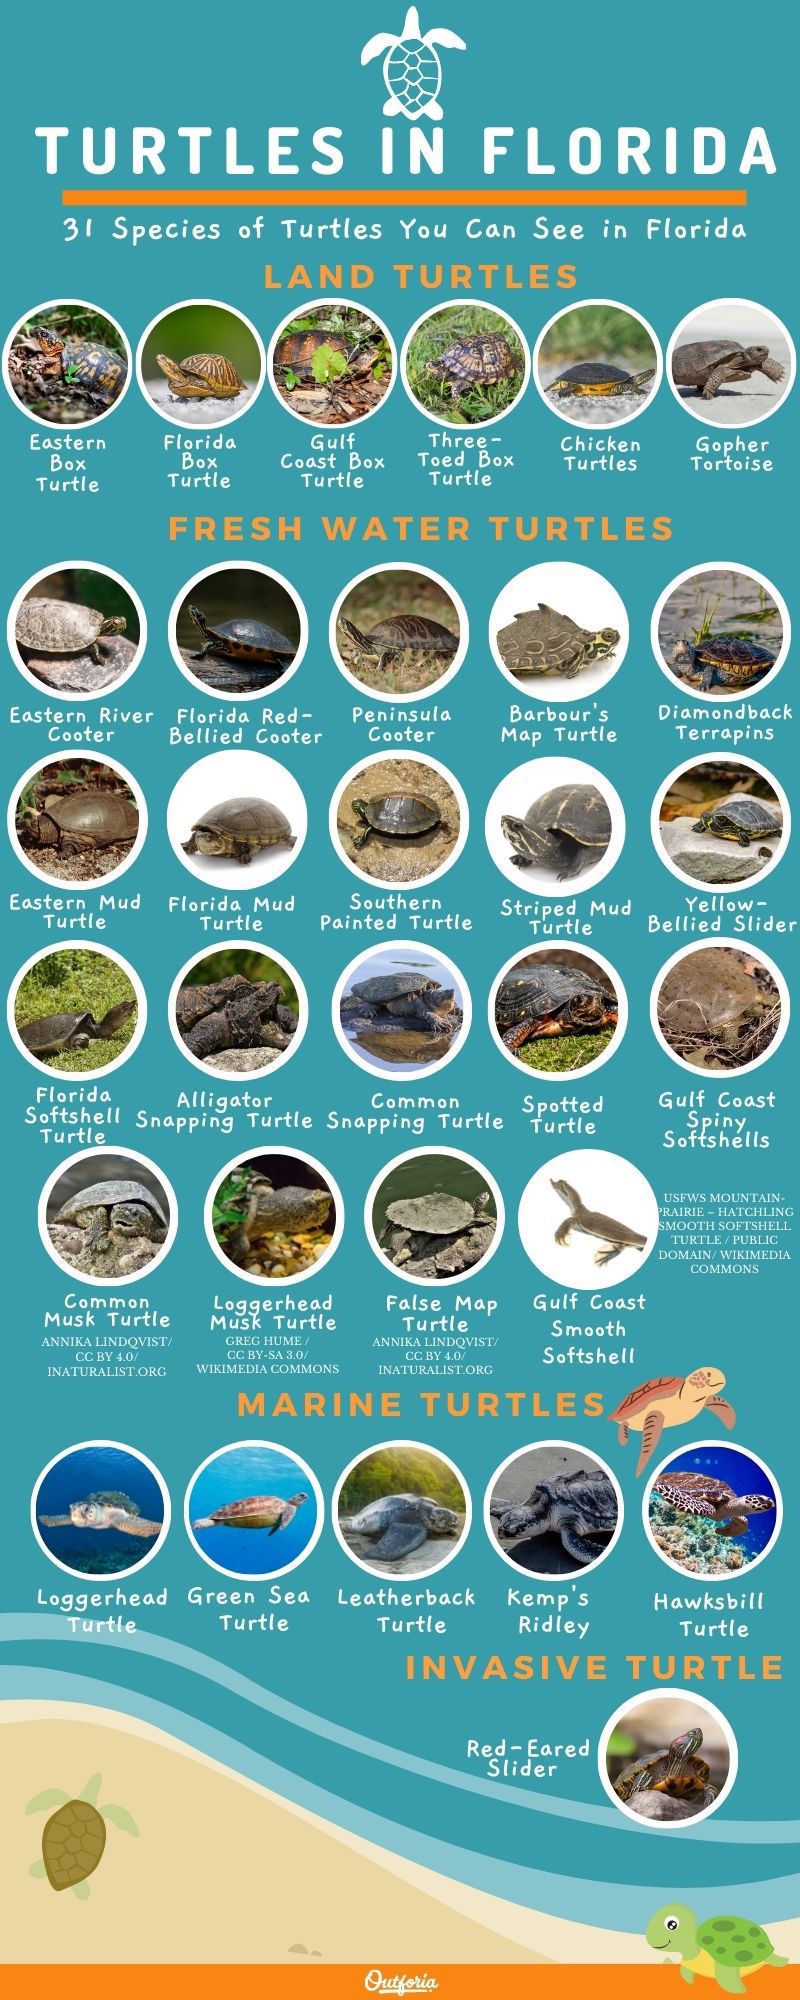 chart of images and names of the different species of turtles in Florida